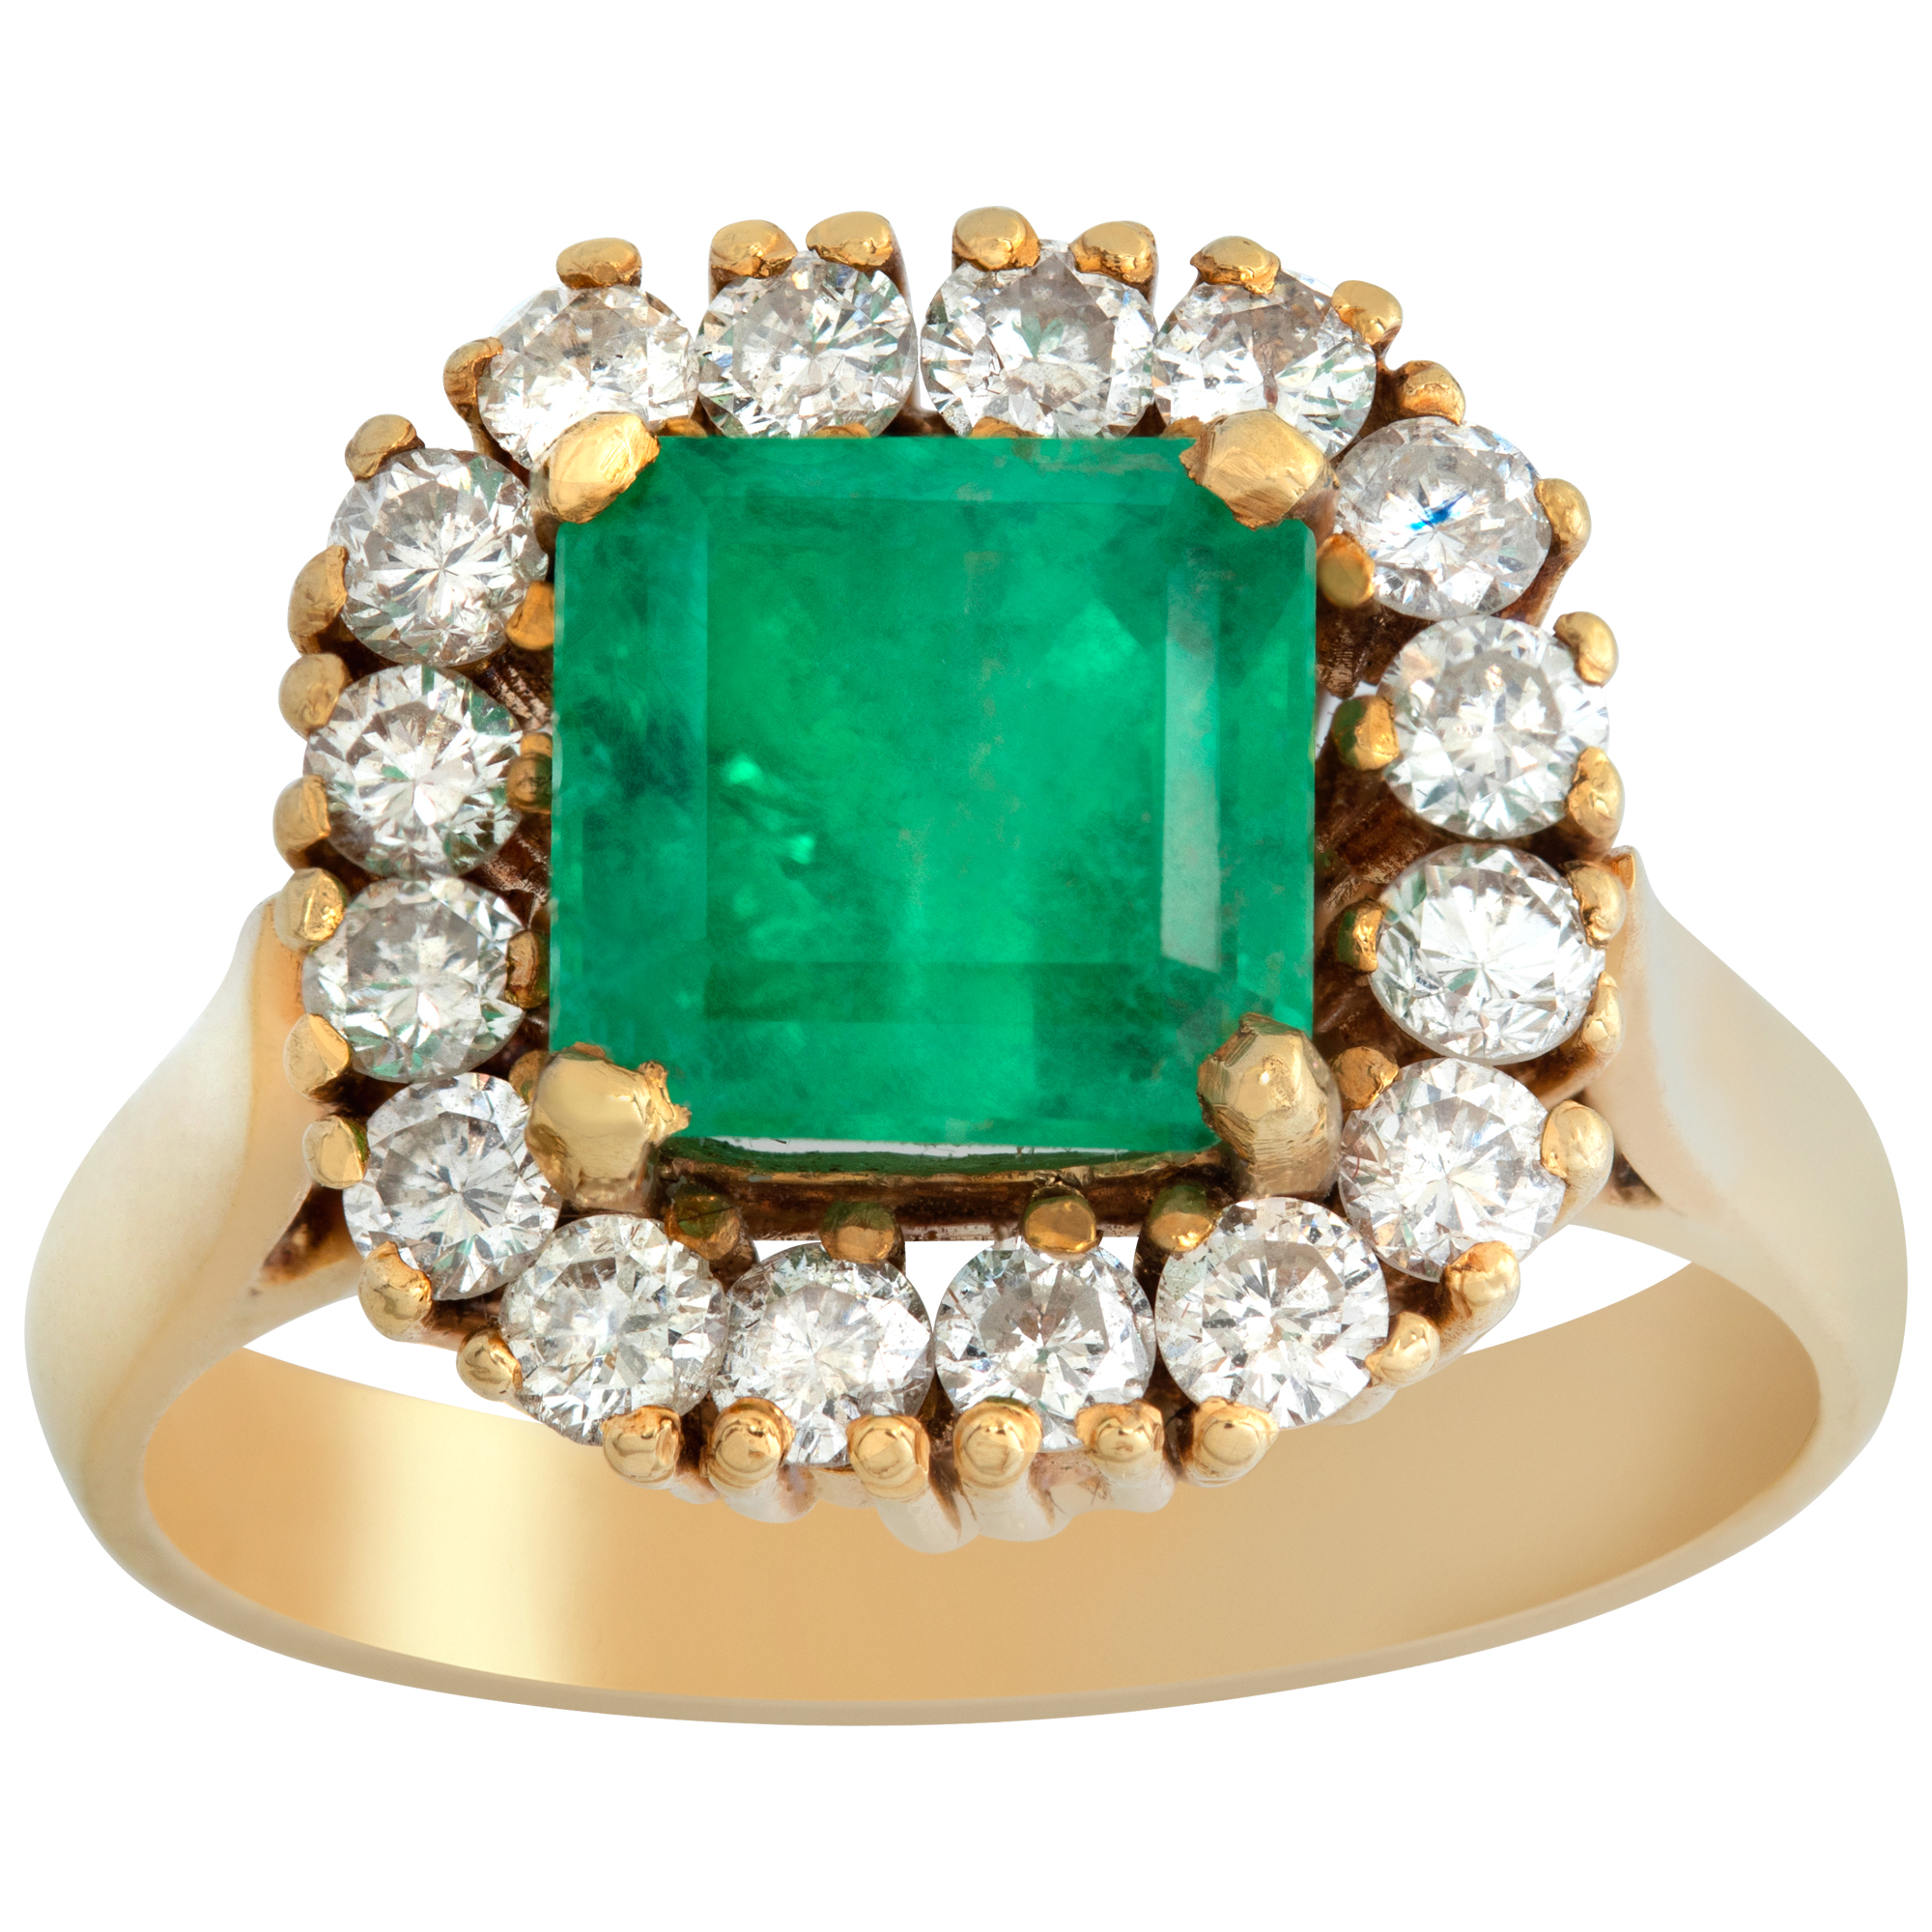 Emerald and diamond ring with an over 2 carat center Emerald surrounded by 0.80 carats in diamonds